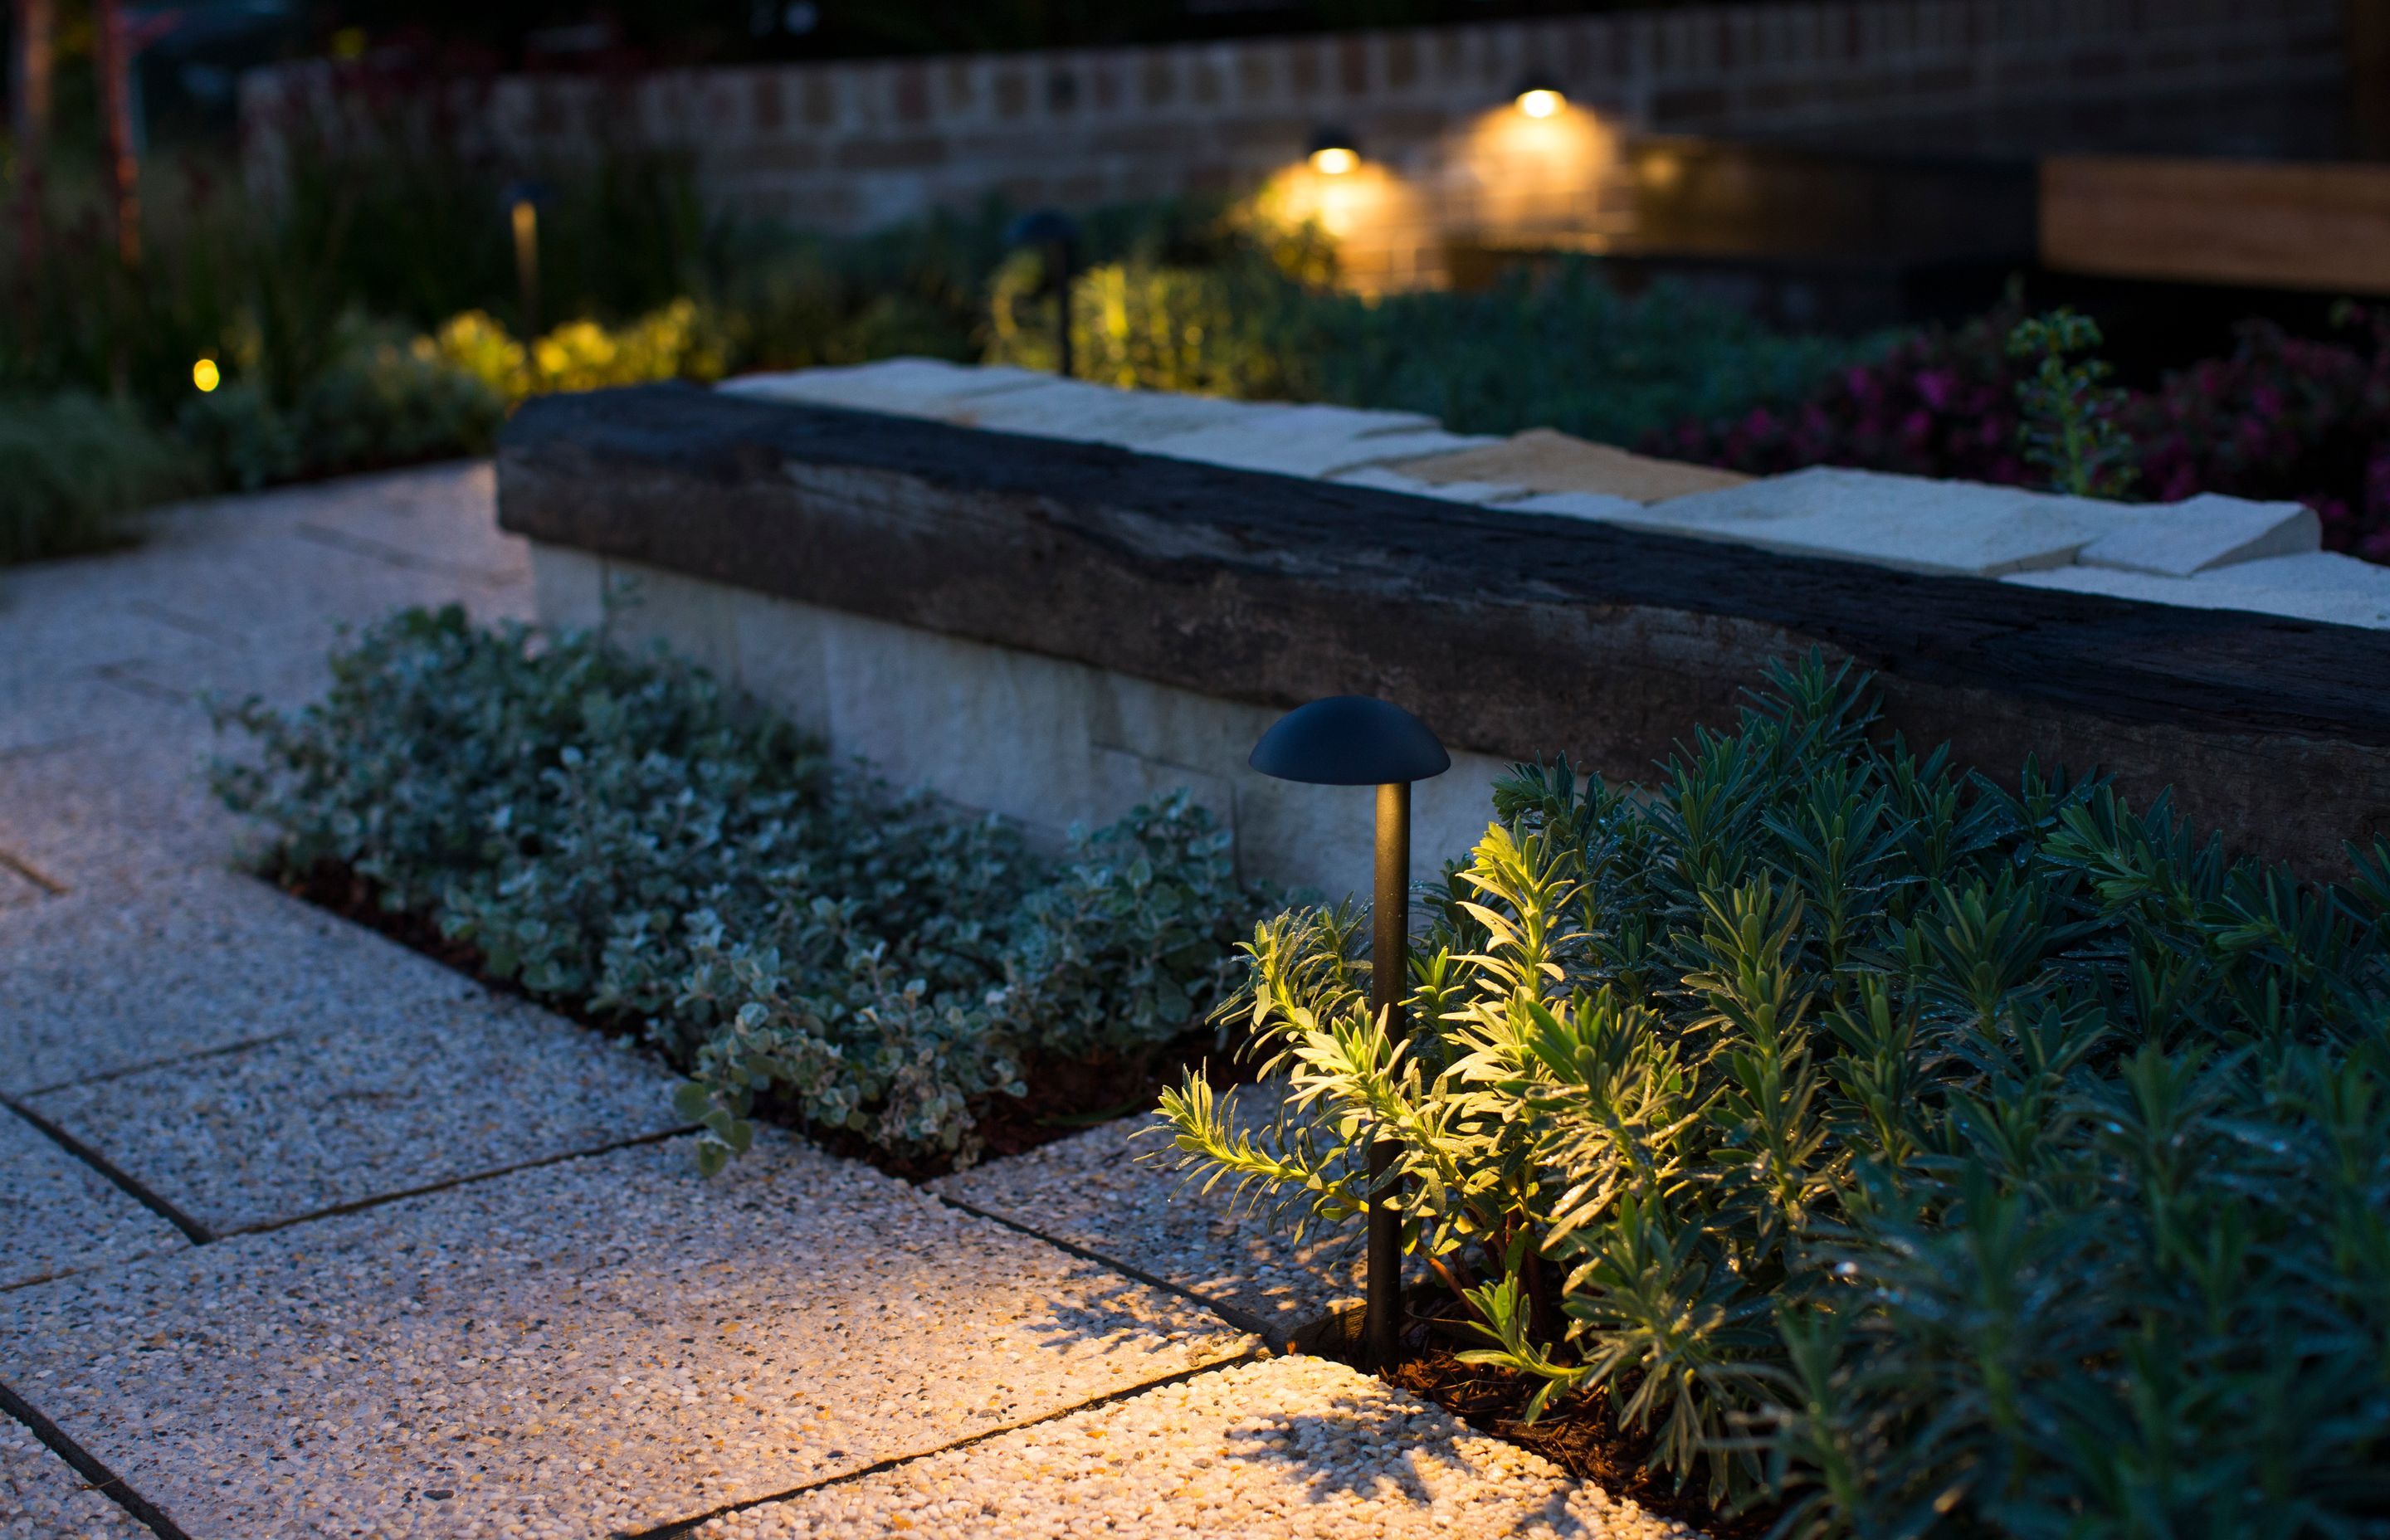 Gardens at Night's products suit the trends in the New Zealand market.